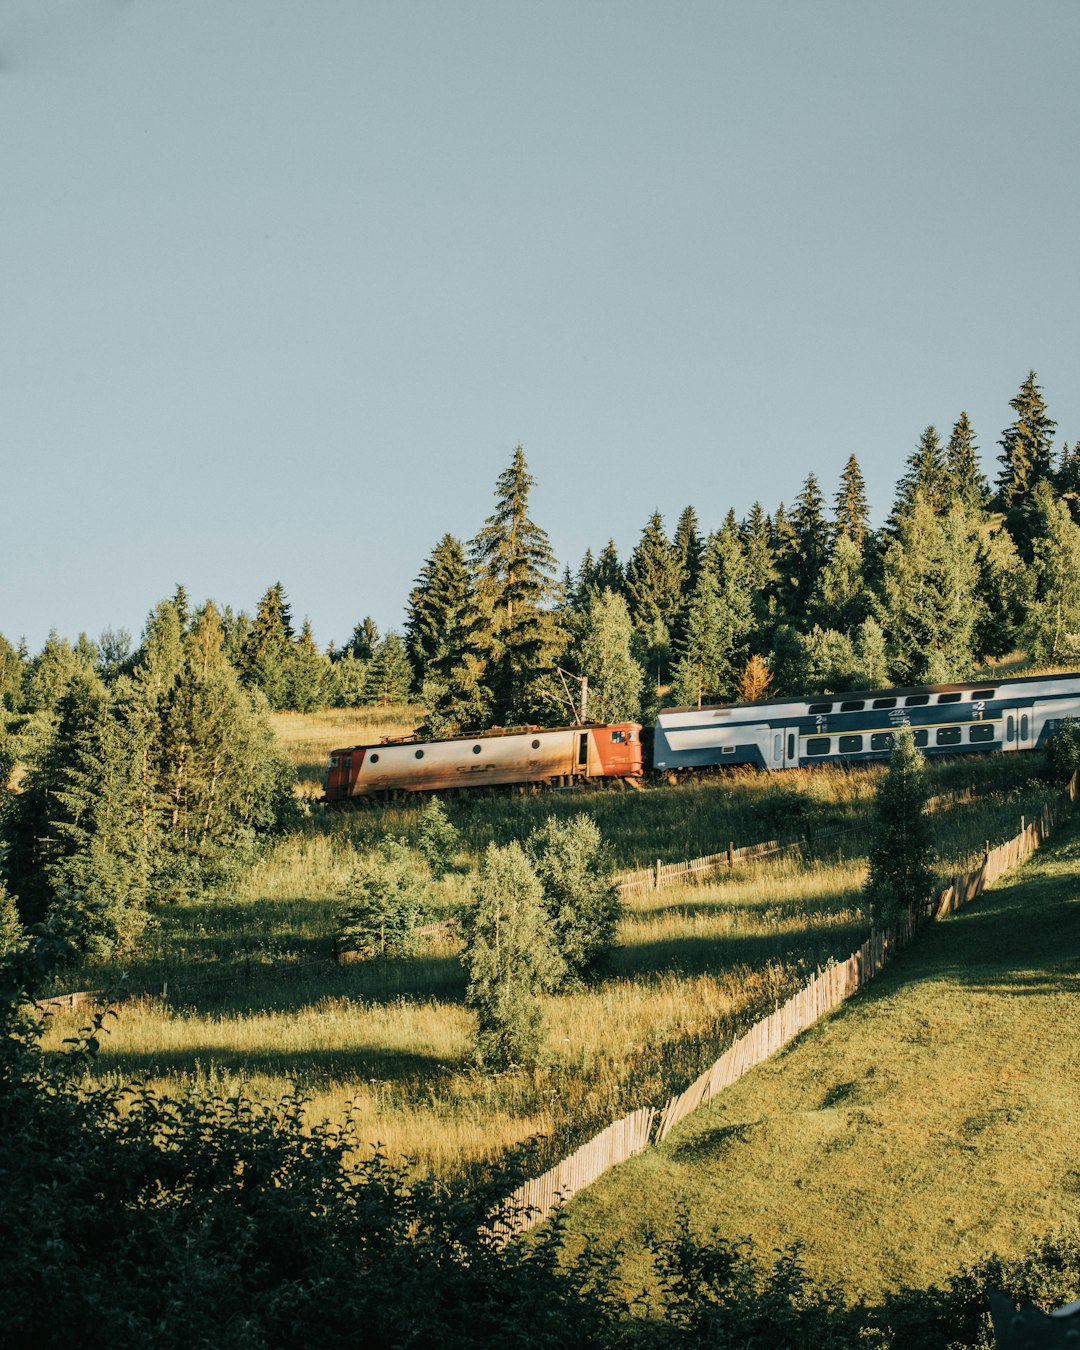 brown and white train on rail tracks near green trees during daytime